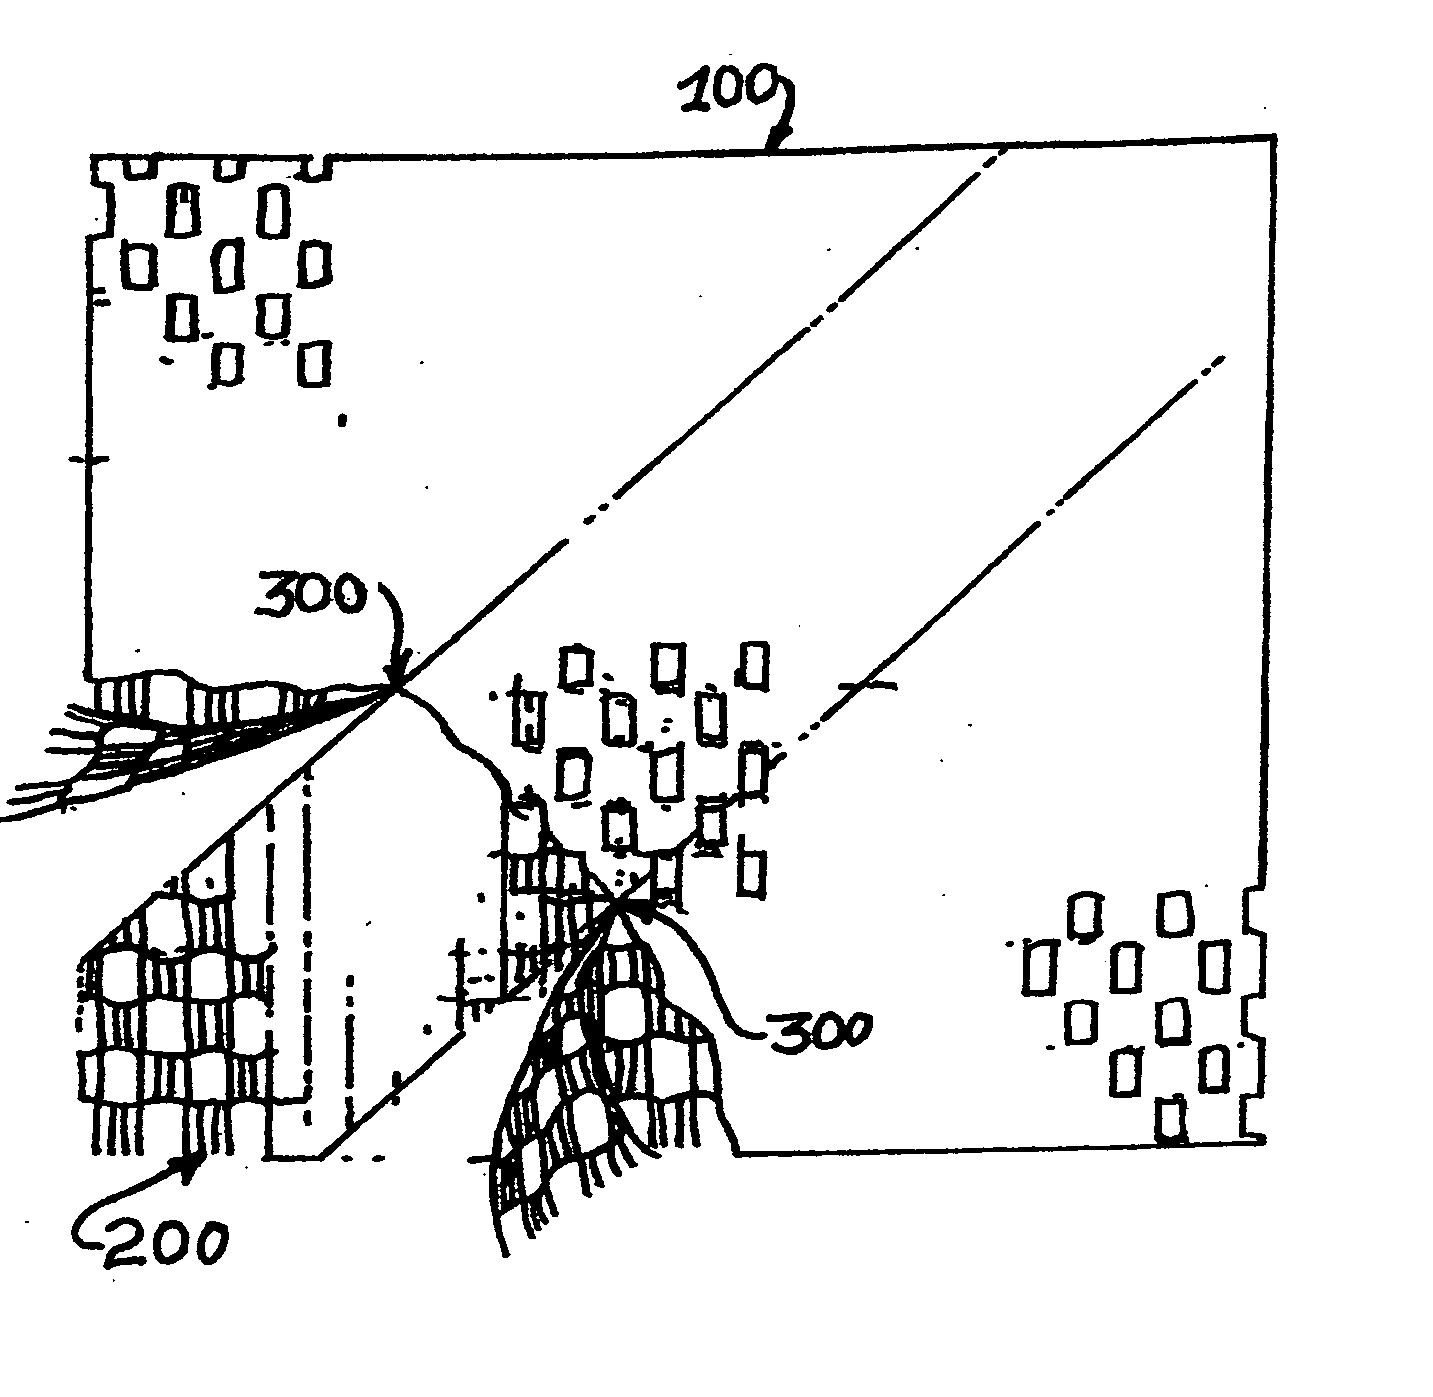 Machine and process for lining and/or cushioning orthopedic casts and other orthopedic devices